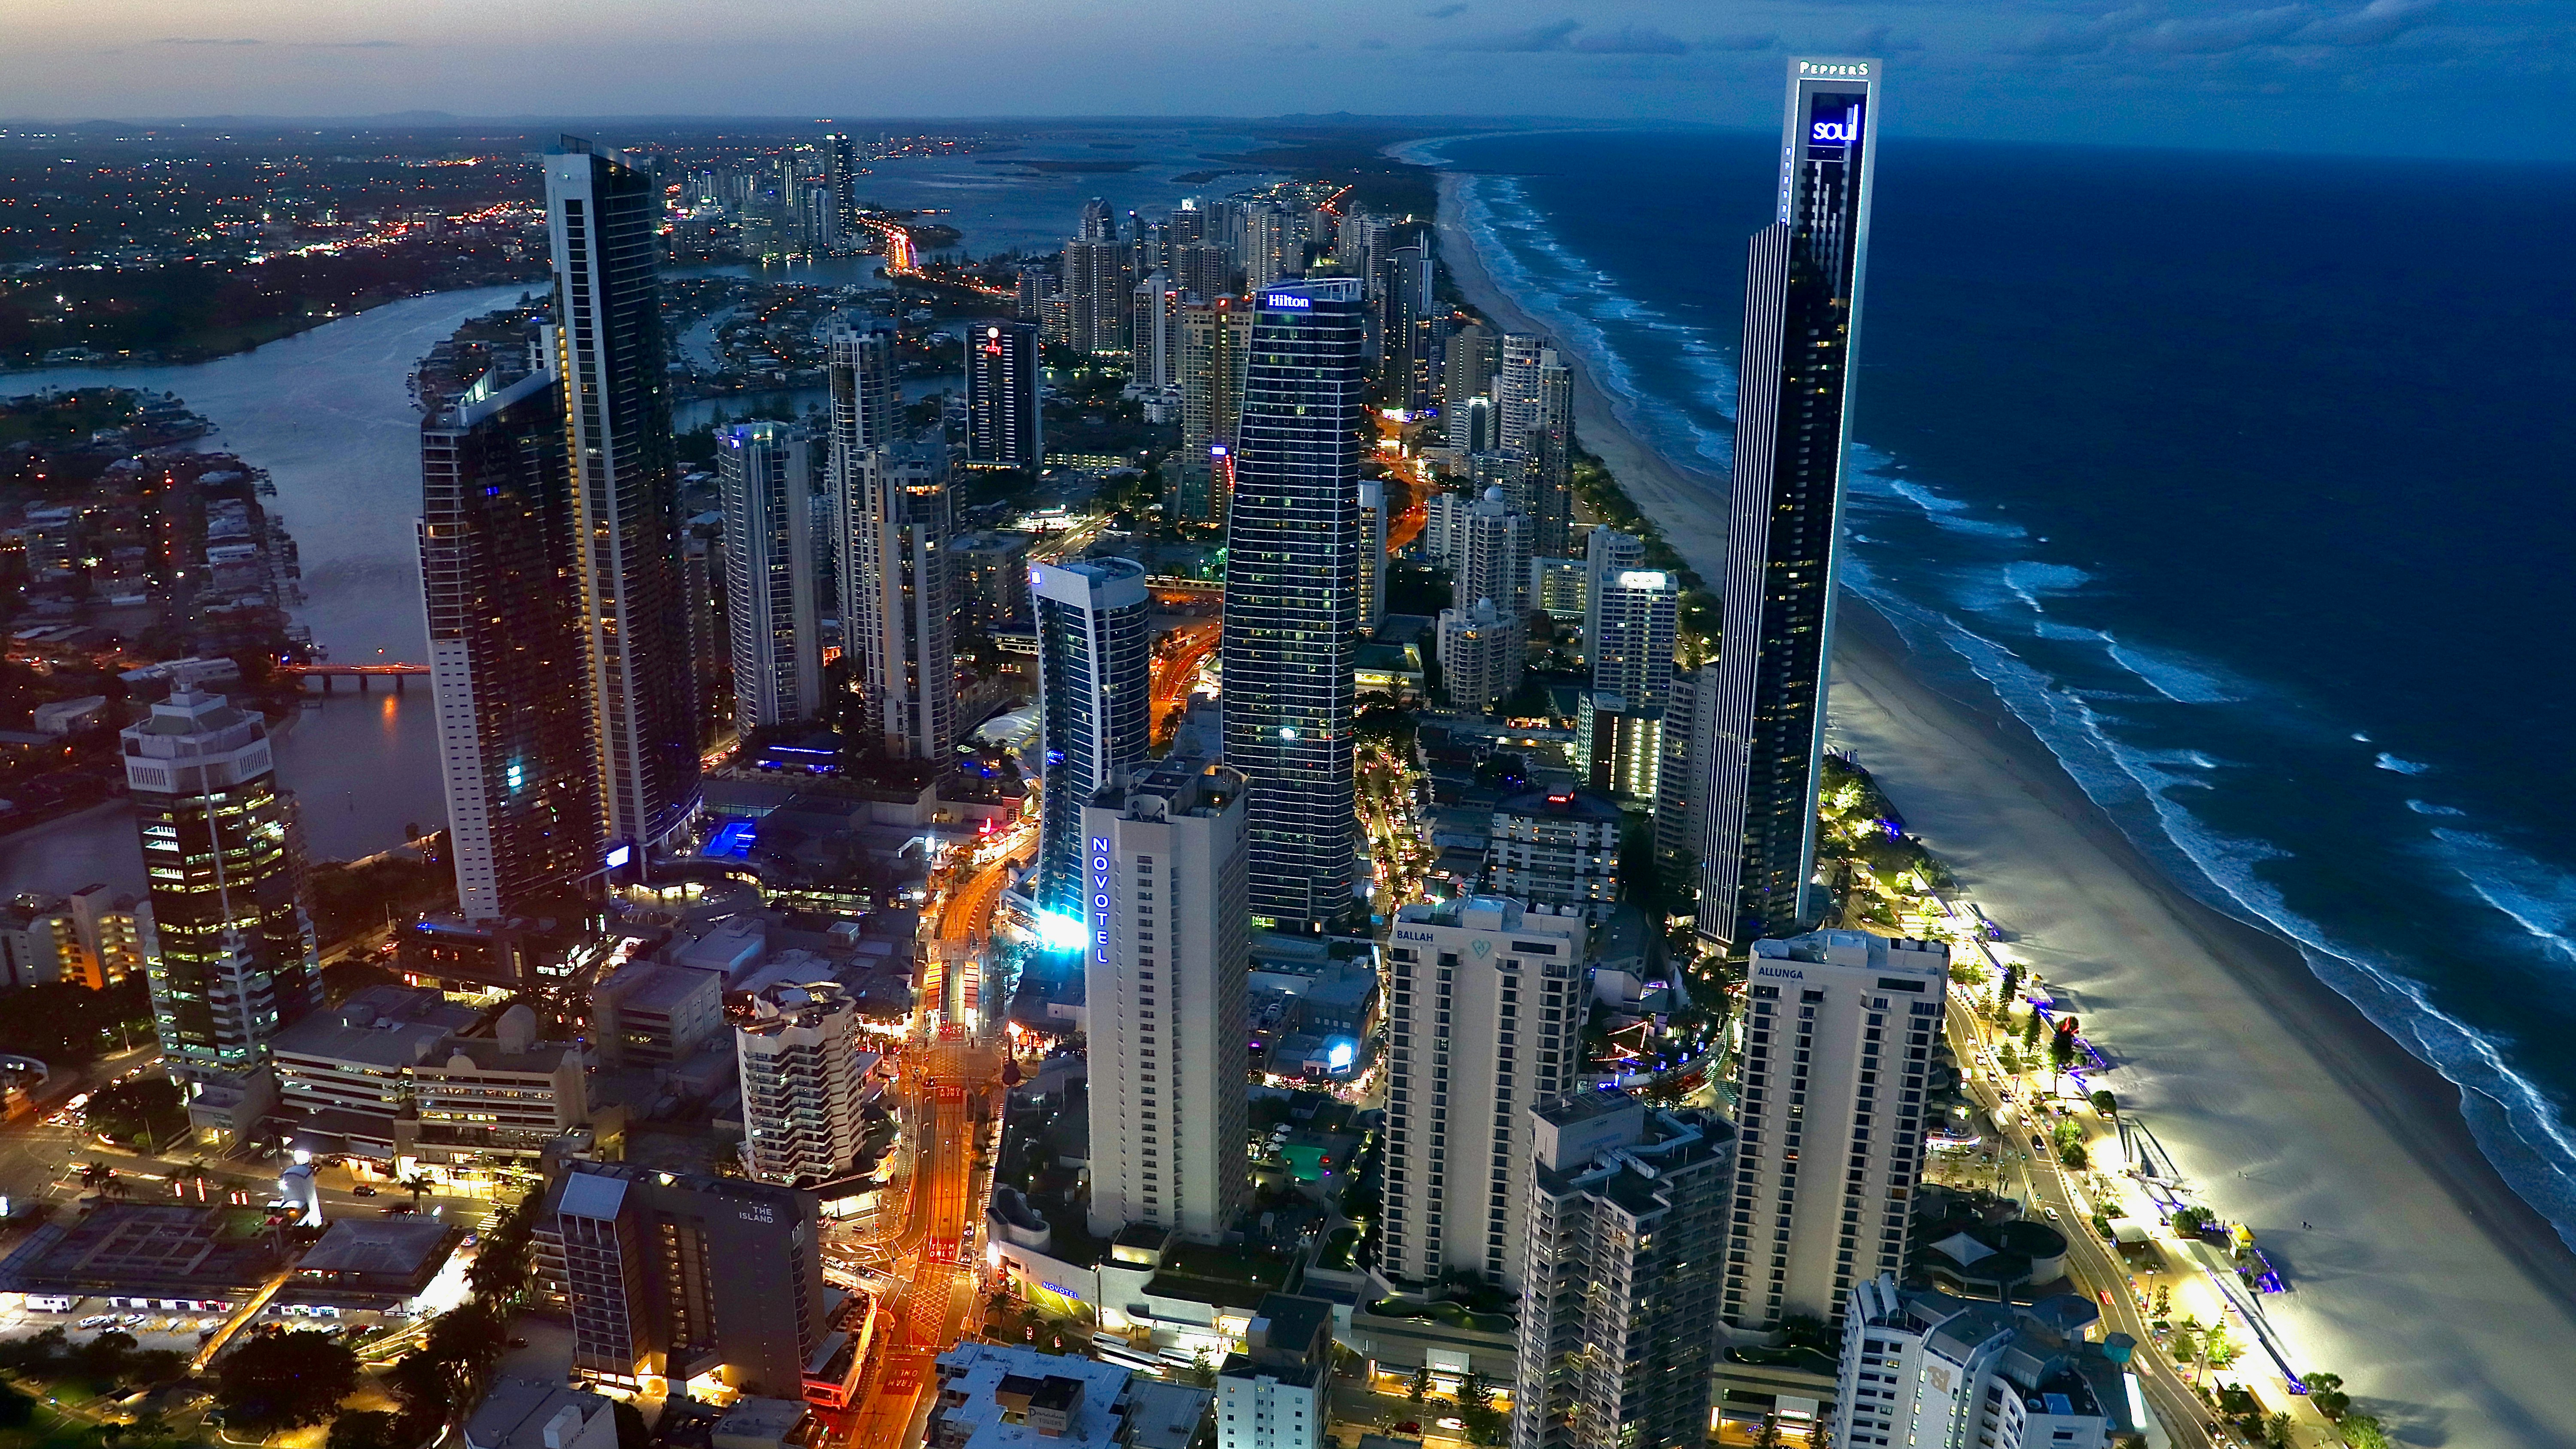 Want to study high-quality education in a relaxed Australian city? Consider coming to the Gold Coast. Here are the top 8 reasons to live and study on the Gold Coast